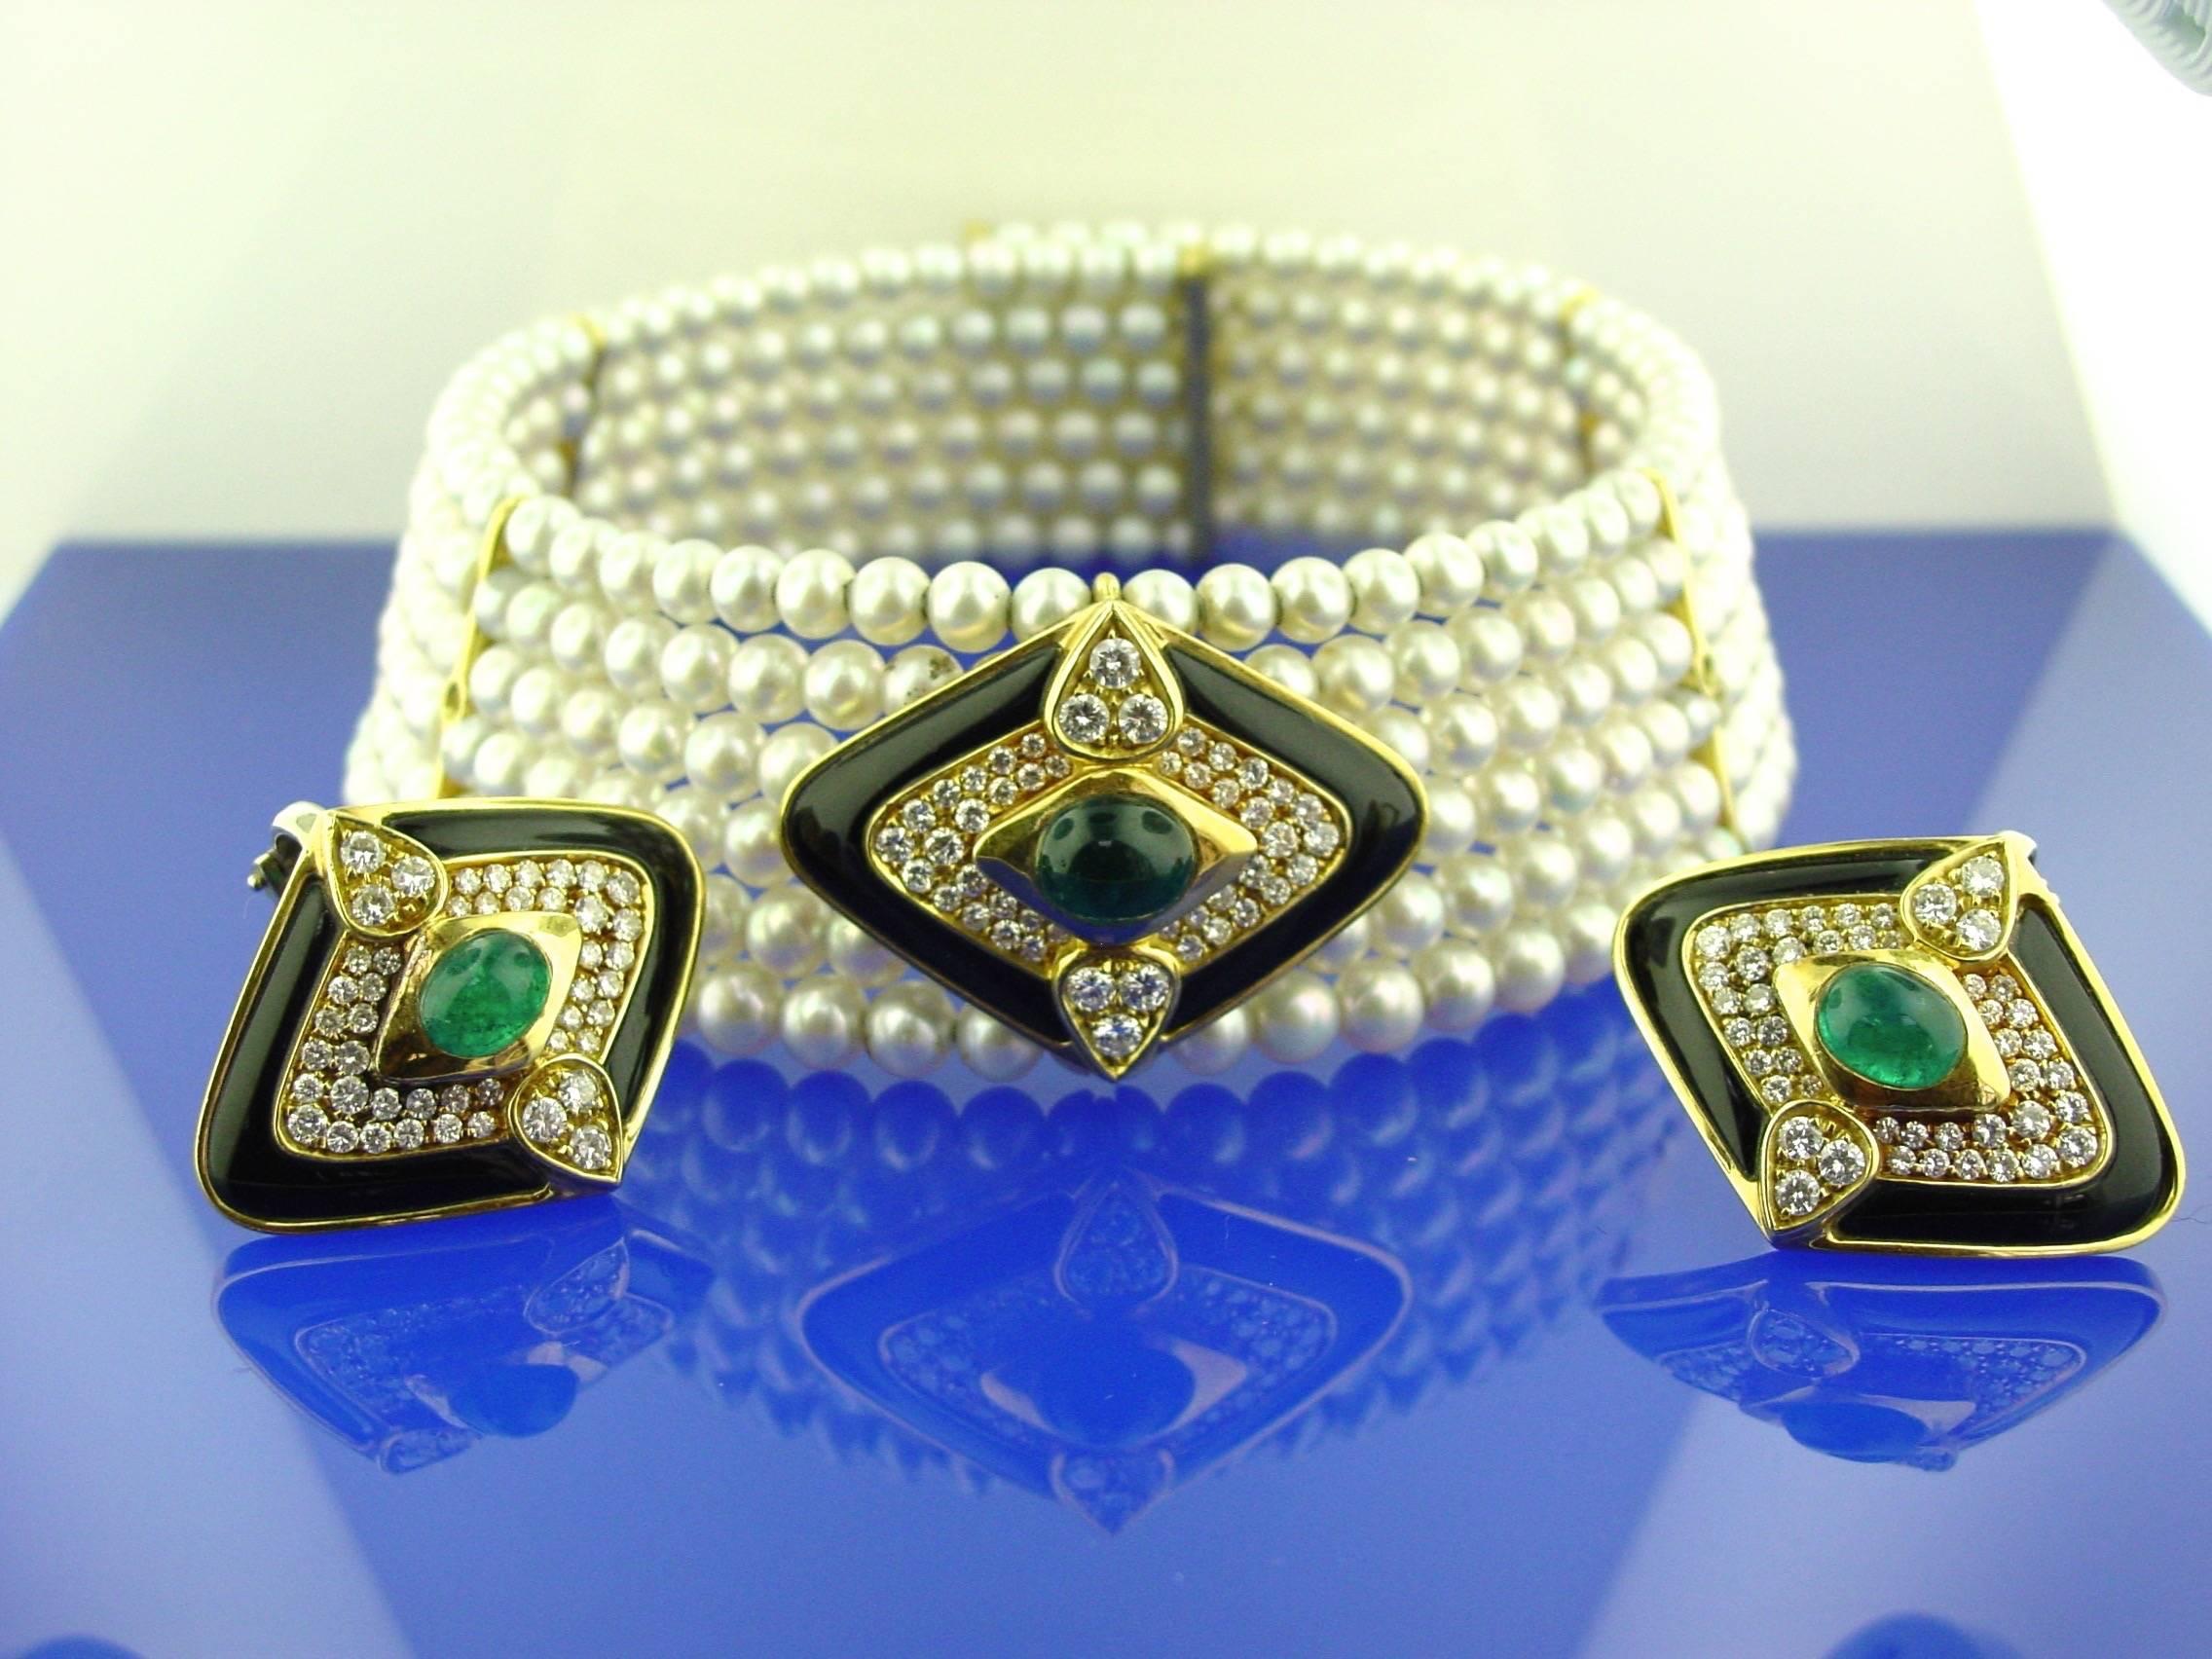 A 18 Karat  Yellow Gold, 6 Row 5.5 mm Cultured Pearl Choker Set With Three Emerald, Diamond and Black Enamel Sections. Two of  the sections may be removed to wear as pierced earrings. Set with approximately 5.50 carats of round brilliant diamonds